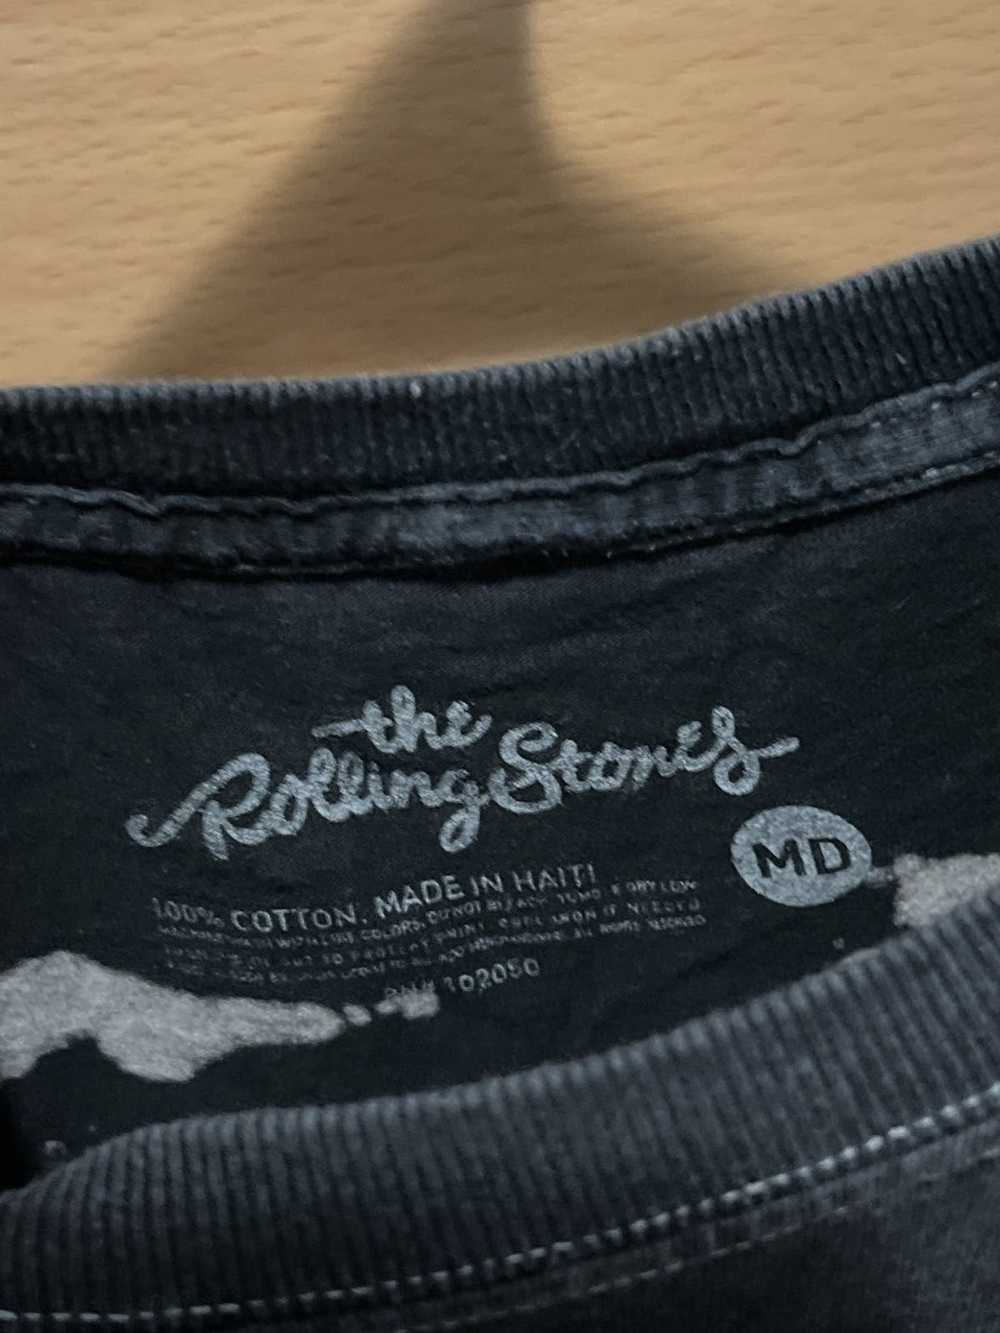 The Rolling Stones Vintage Rolling Stones tee - image 3